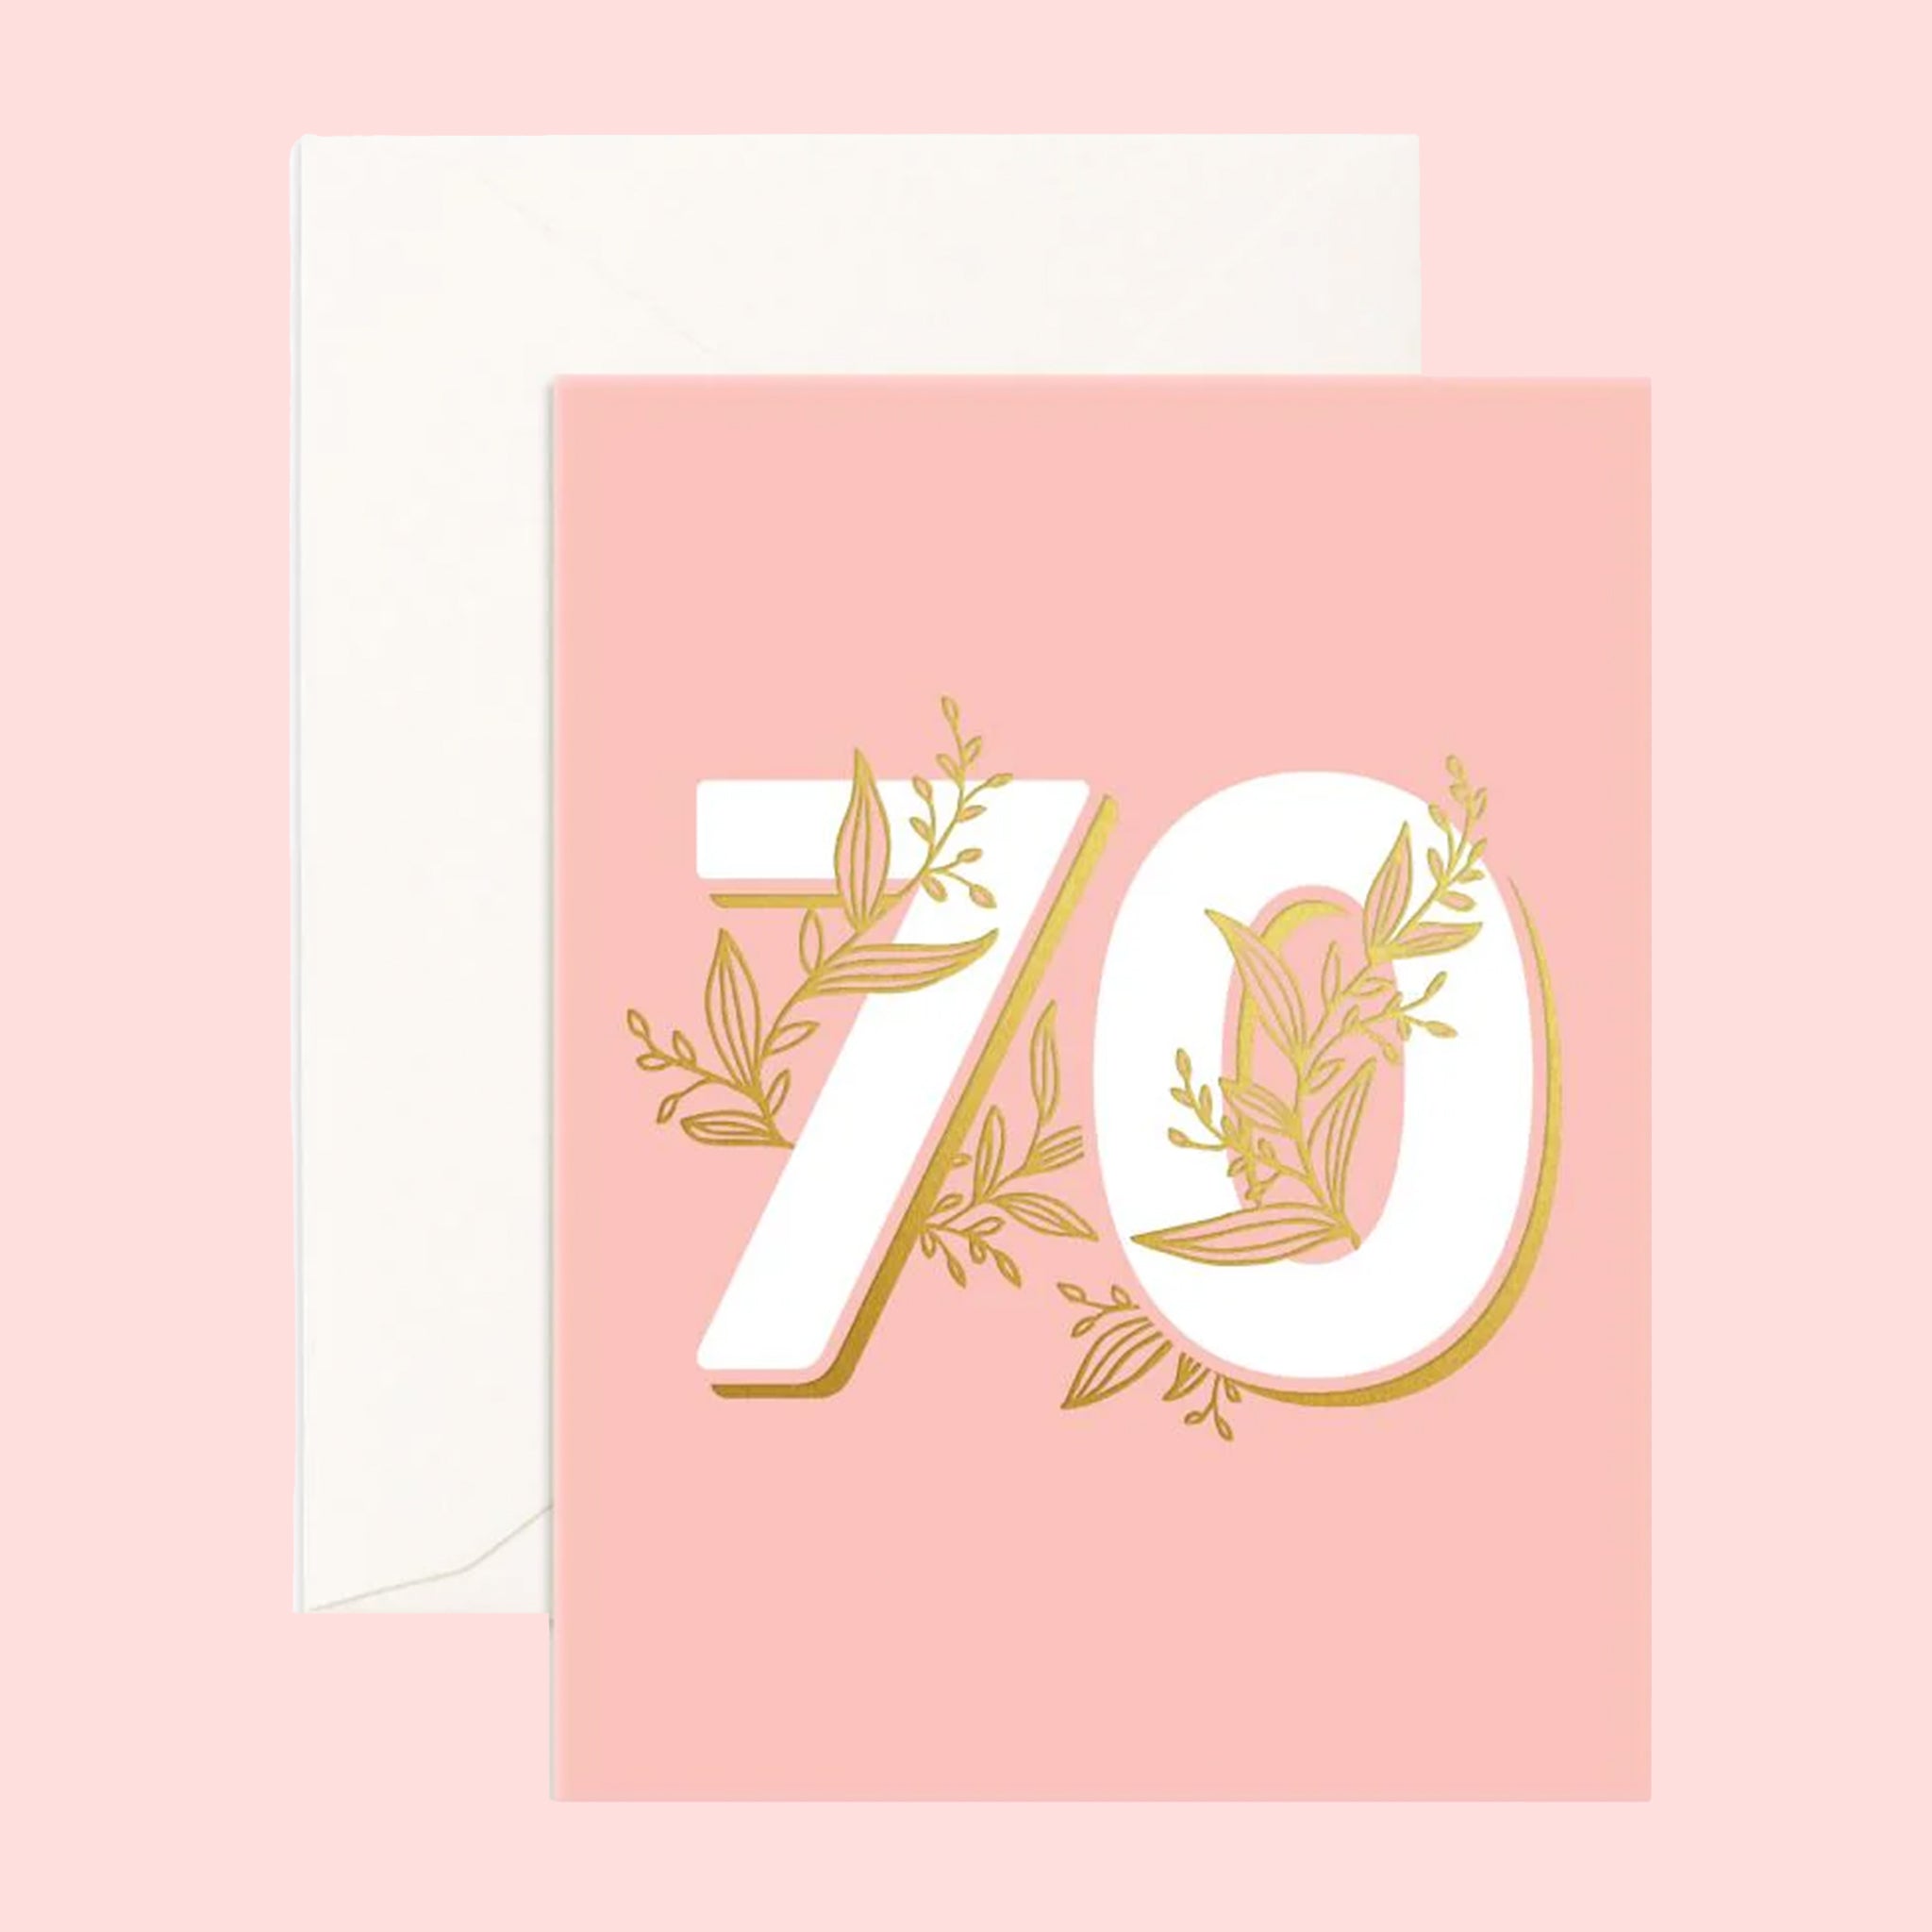 On a pink background is a pink greeting card with ivory "70" in the center with gold foiled details. 